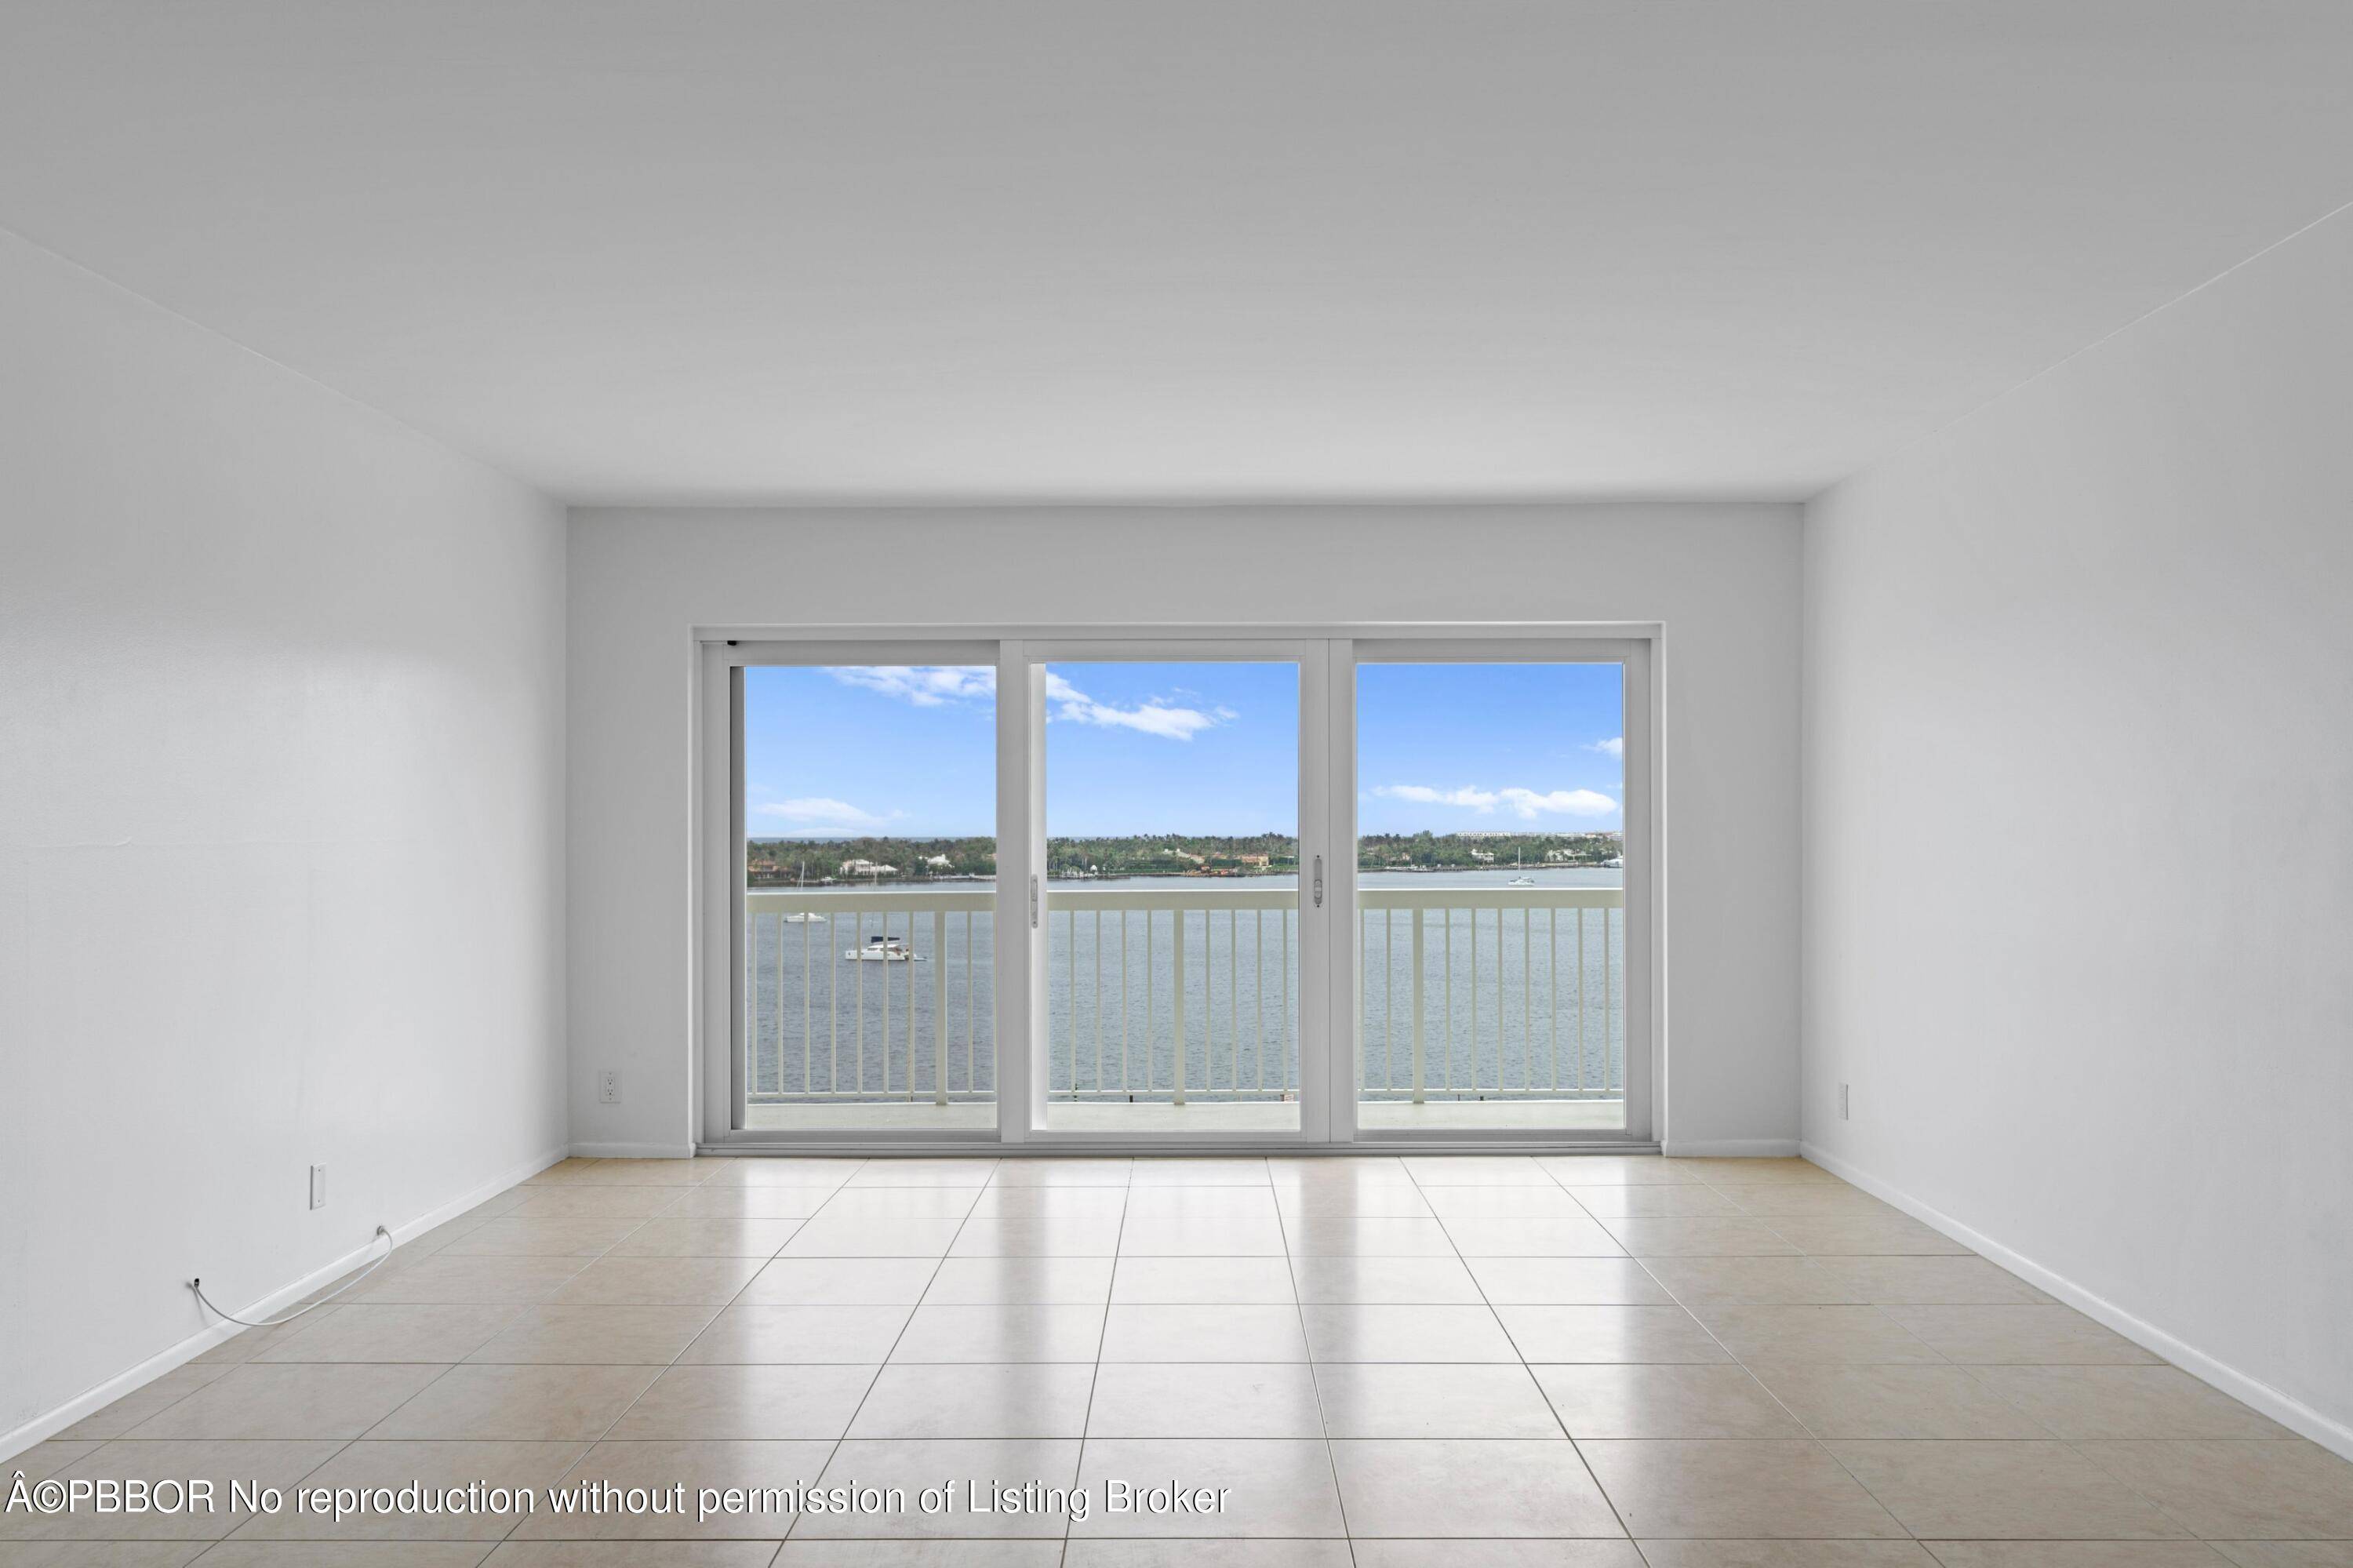 Gorgeous waterfront rental unit with stunning east views of the ocean and Intracoastal.